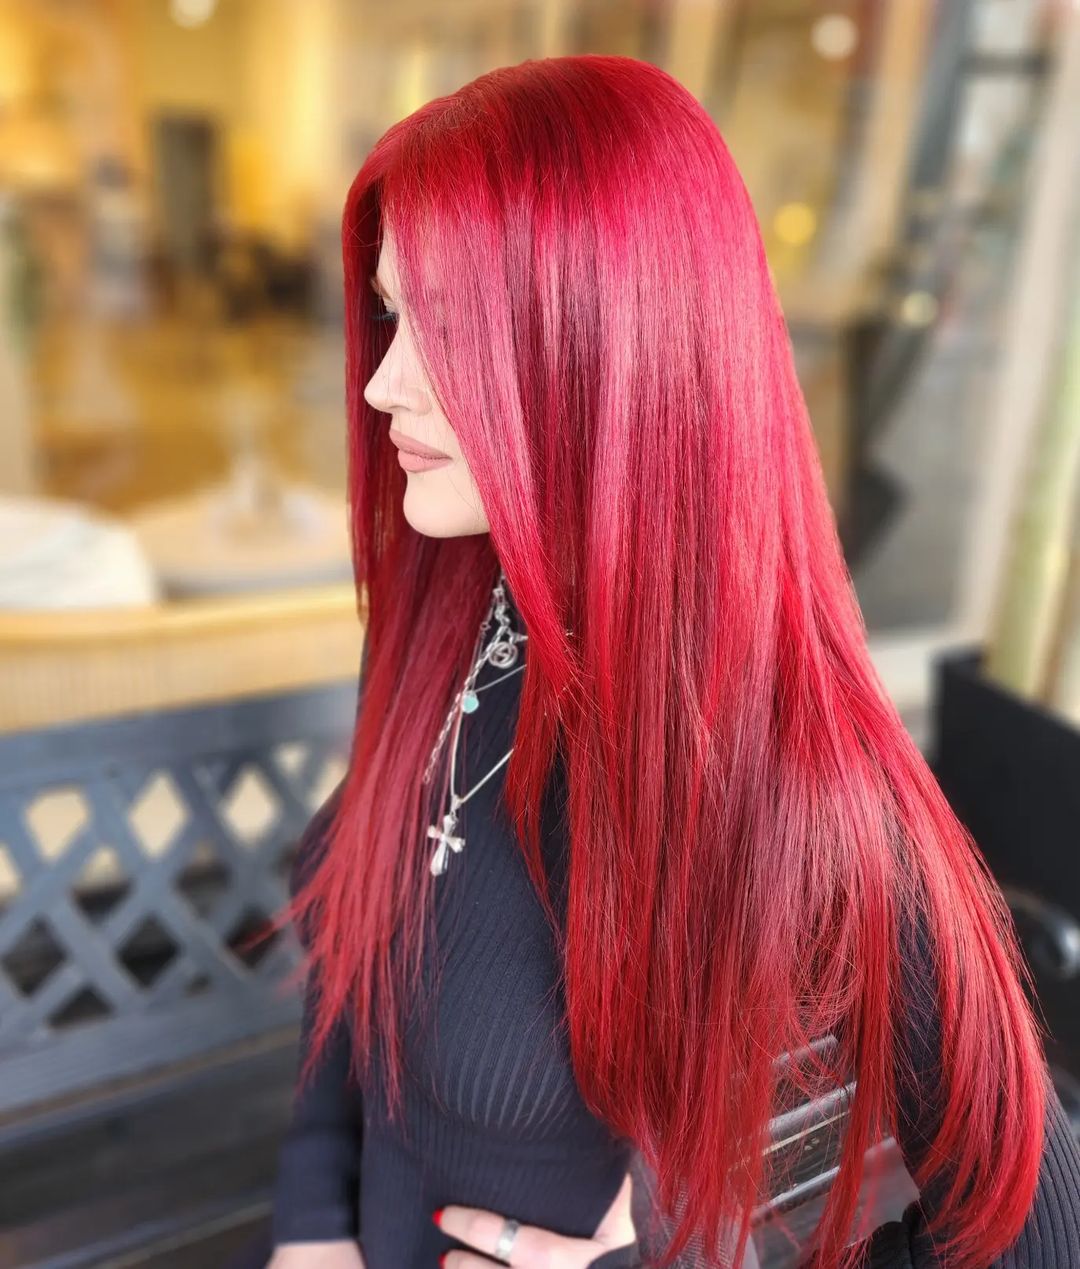 shiny red hair